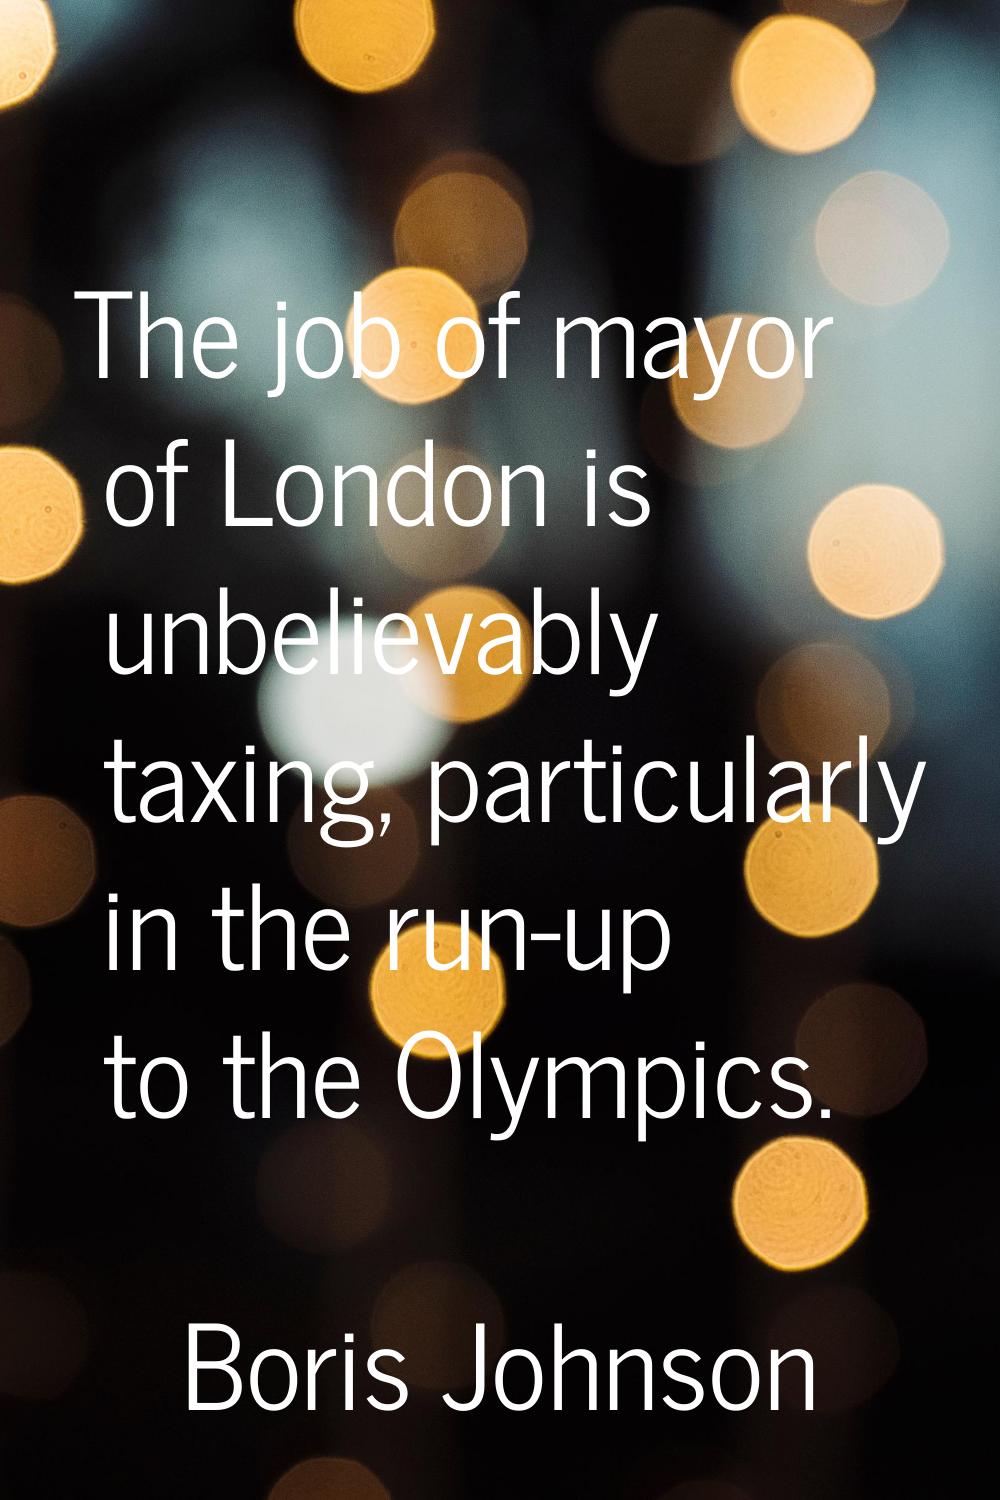 The job of mayor of London is unbelievably taxing, particularly in the run-up to the Olympics.